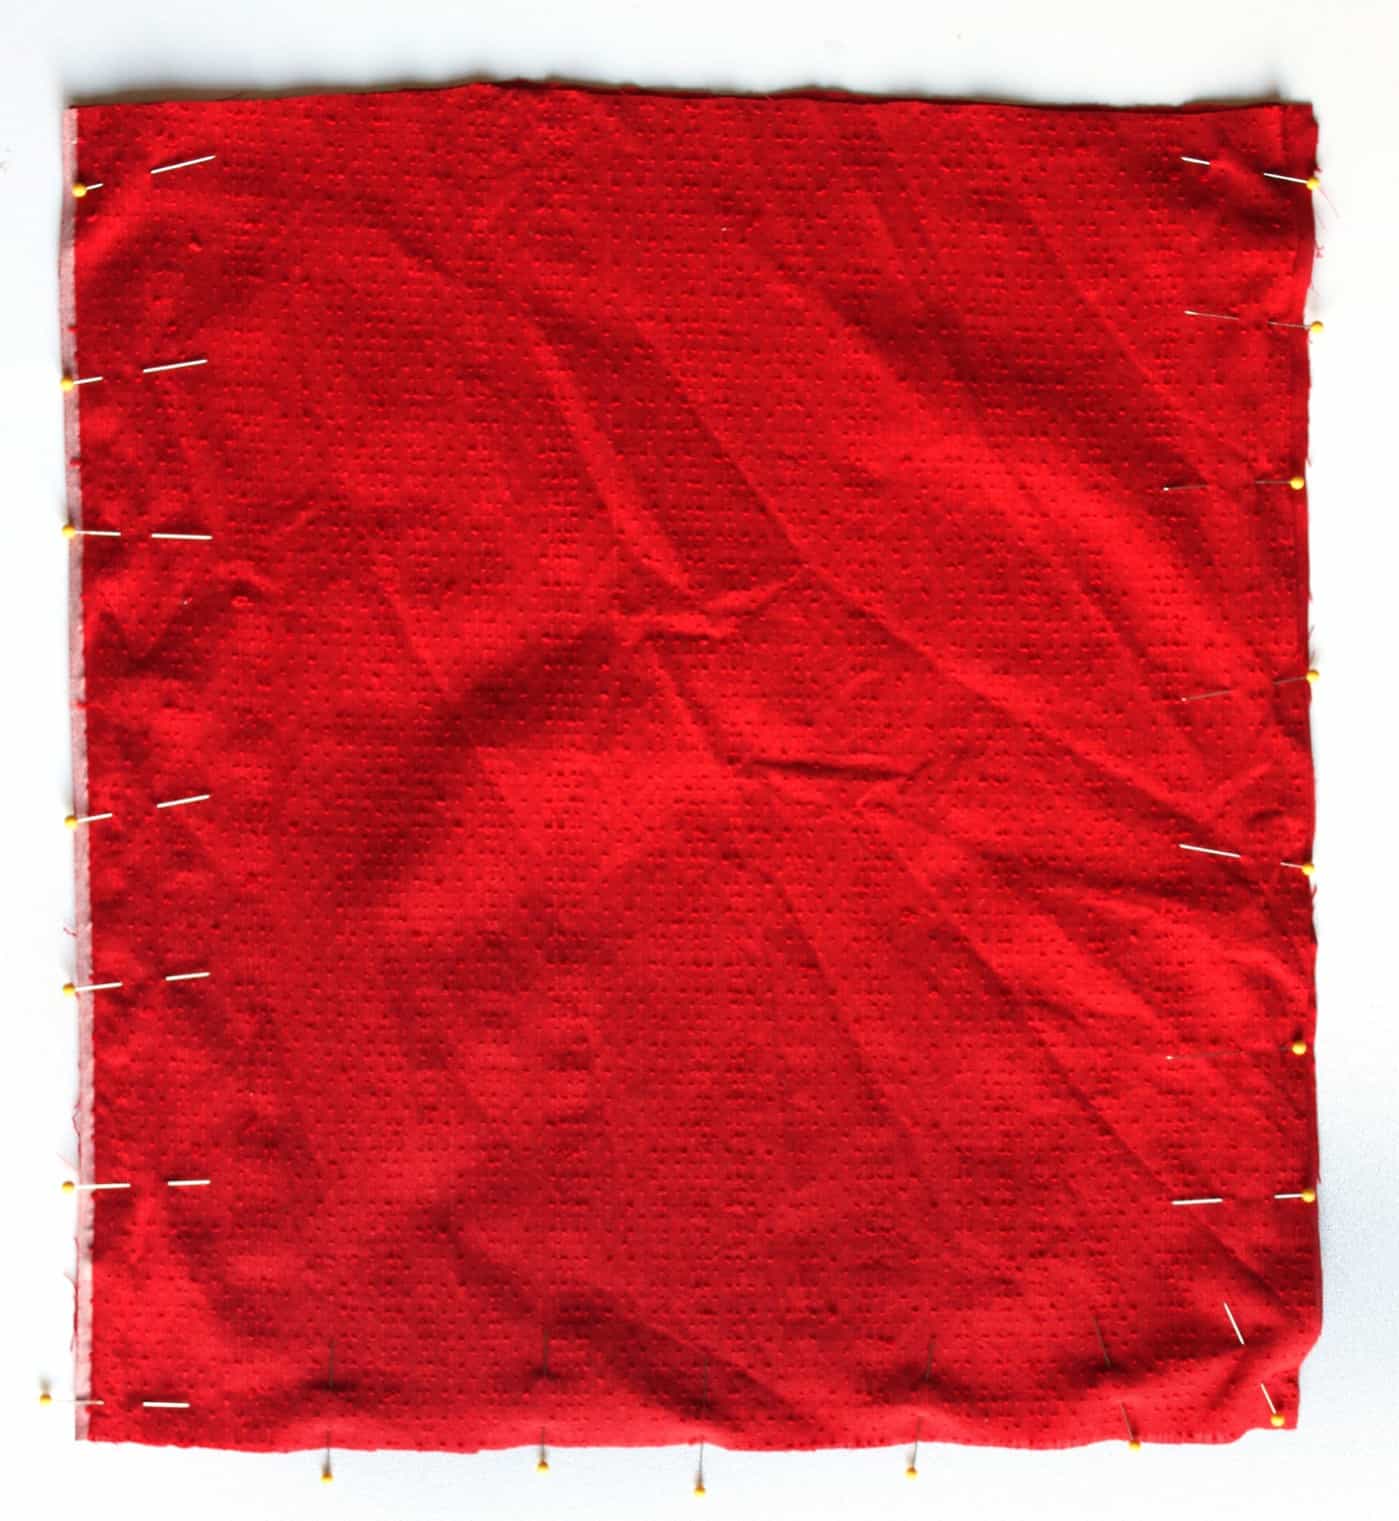 Red fabric lining pinned together on a work surface